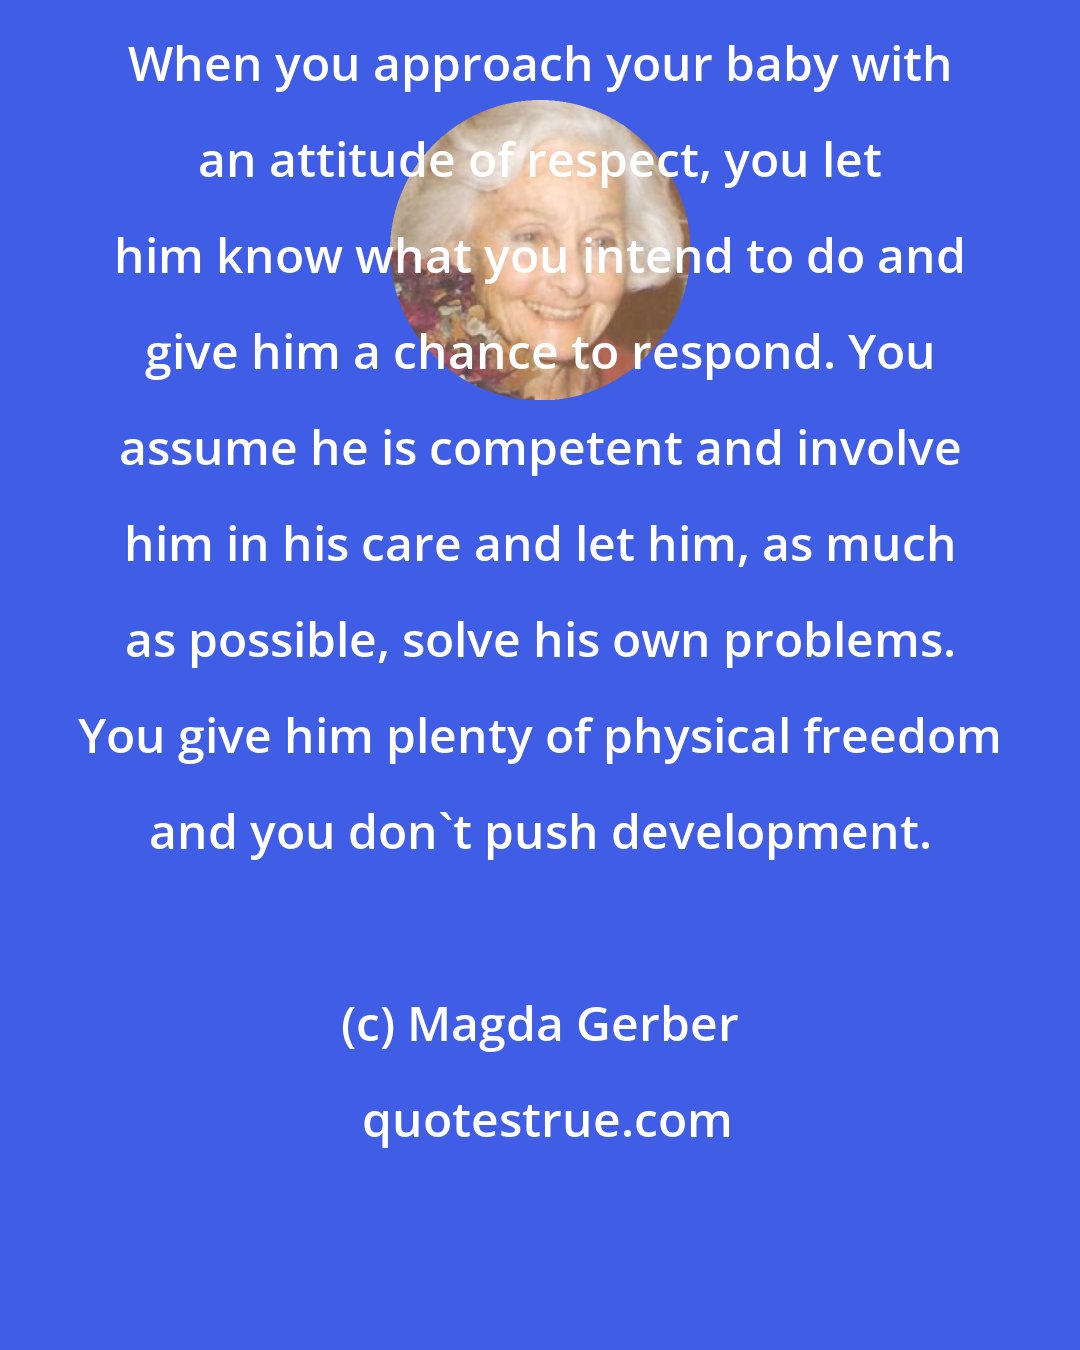 Magda Gerber: When you approach your baby with an attitude of respect, you let him know what you intend to do and give him a chance to respond. You assume he is competent and involve him in his care and let him, as much as possible, solve his own problems. You give him plenty of physical freedom and you don't push development.